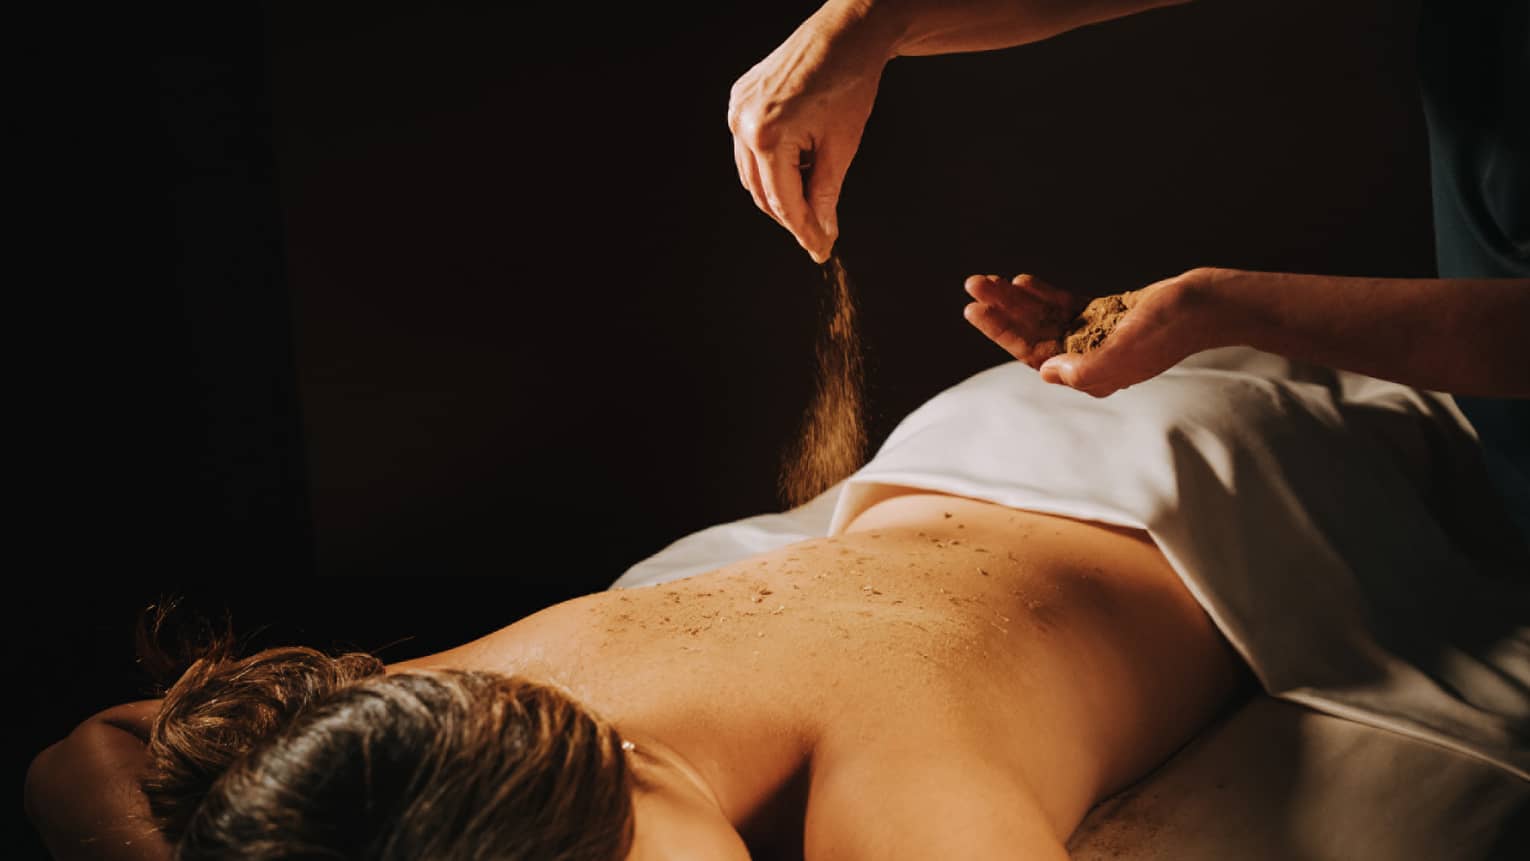 Spa staff sprinkled coffee powder over woman's bare back as she lays on massage table